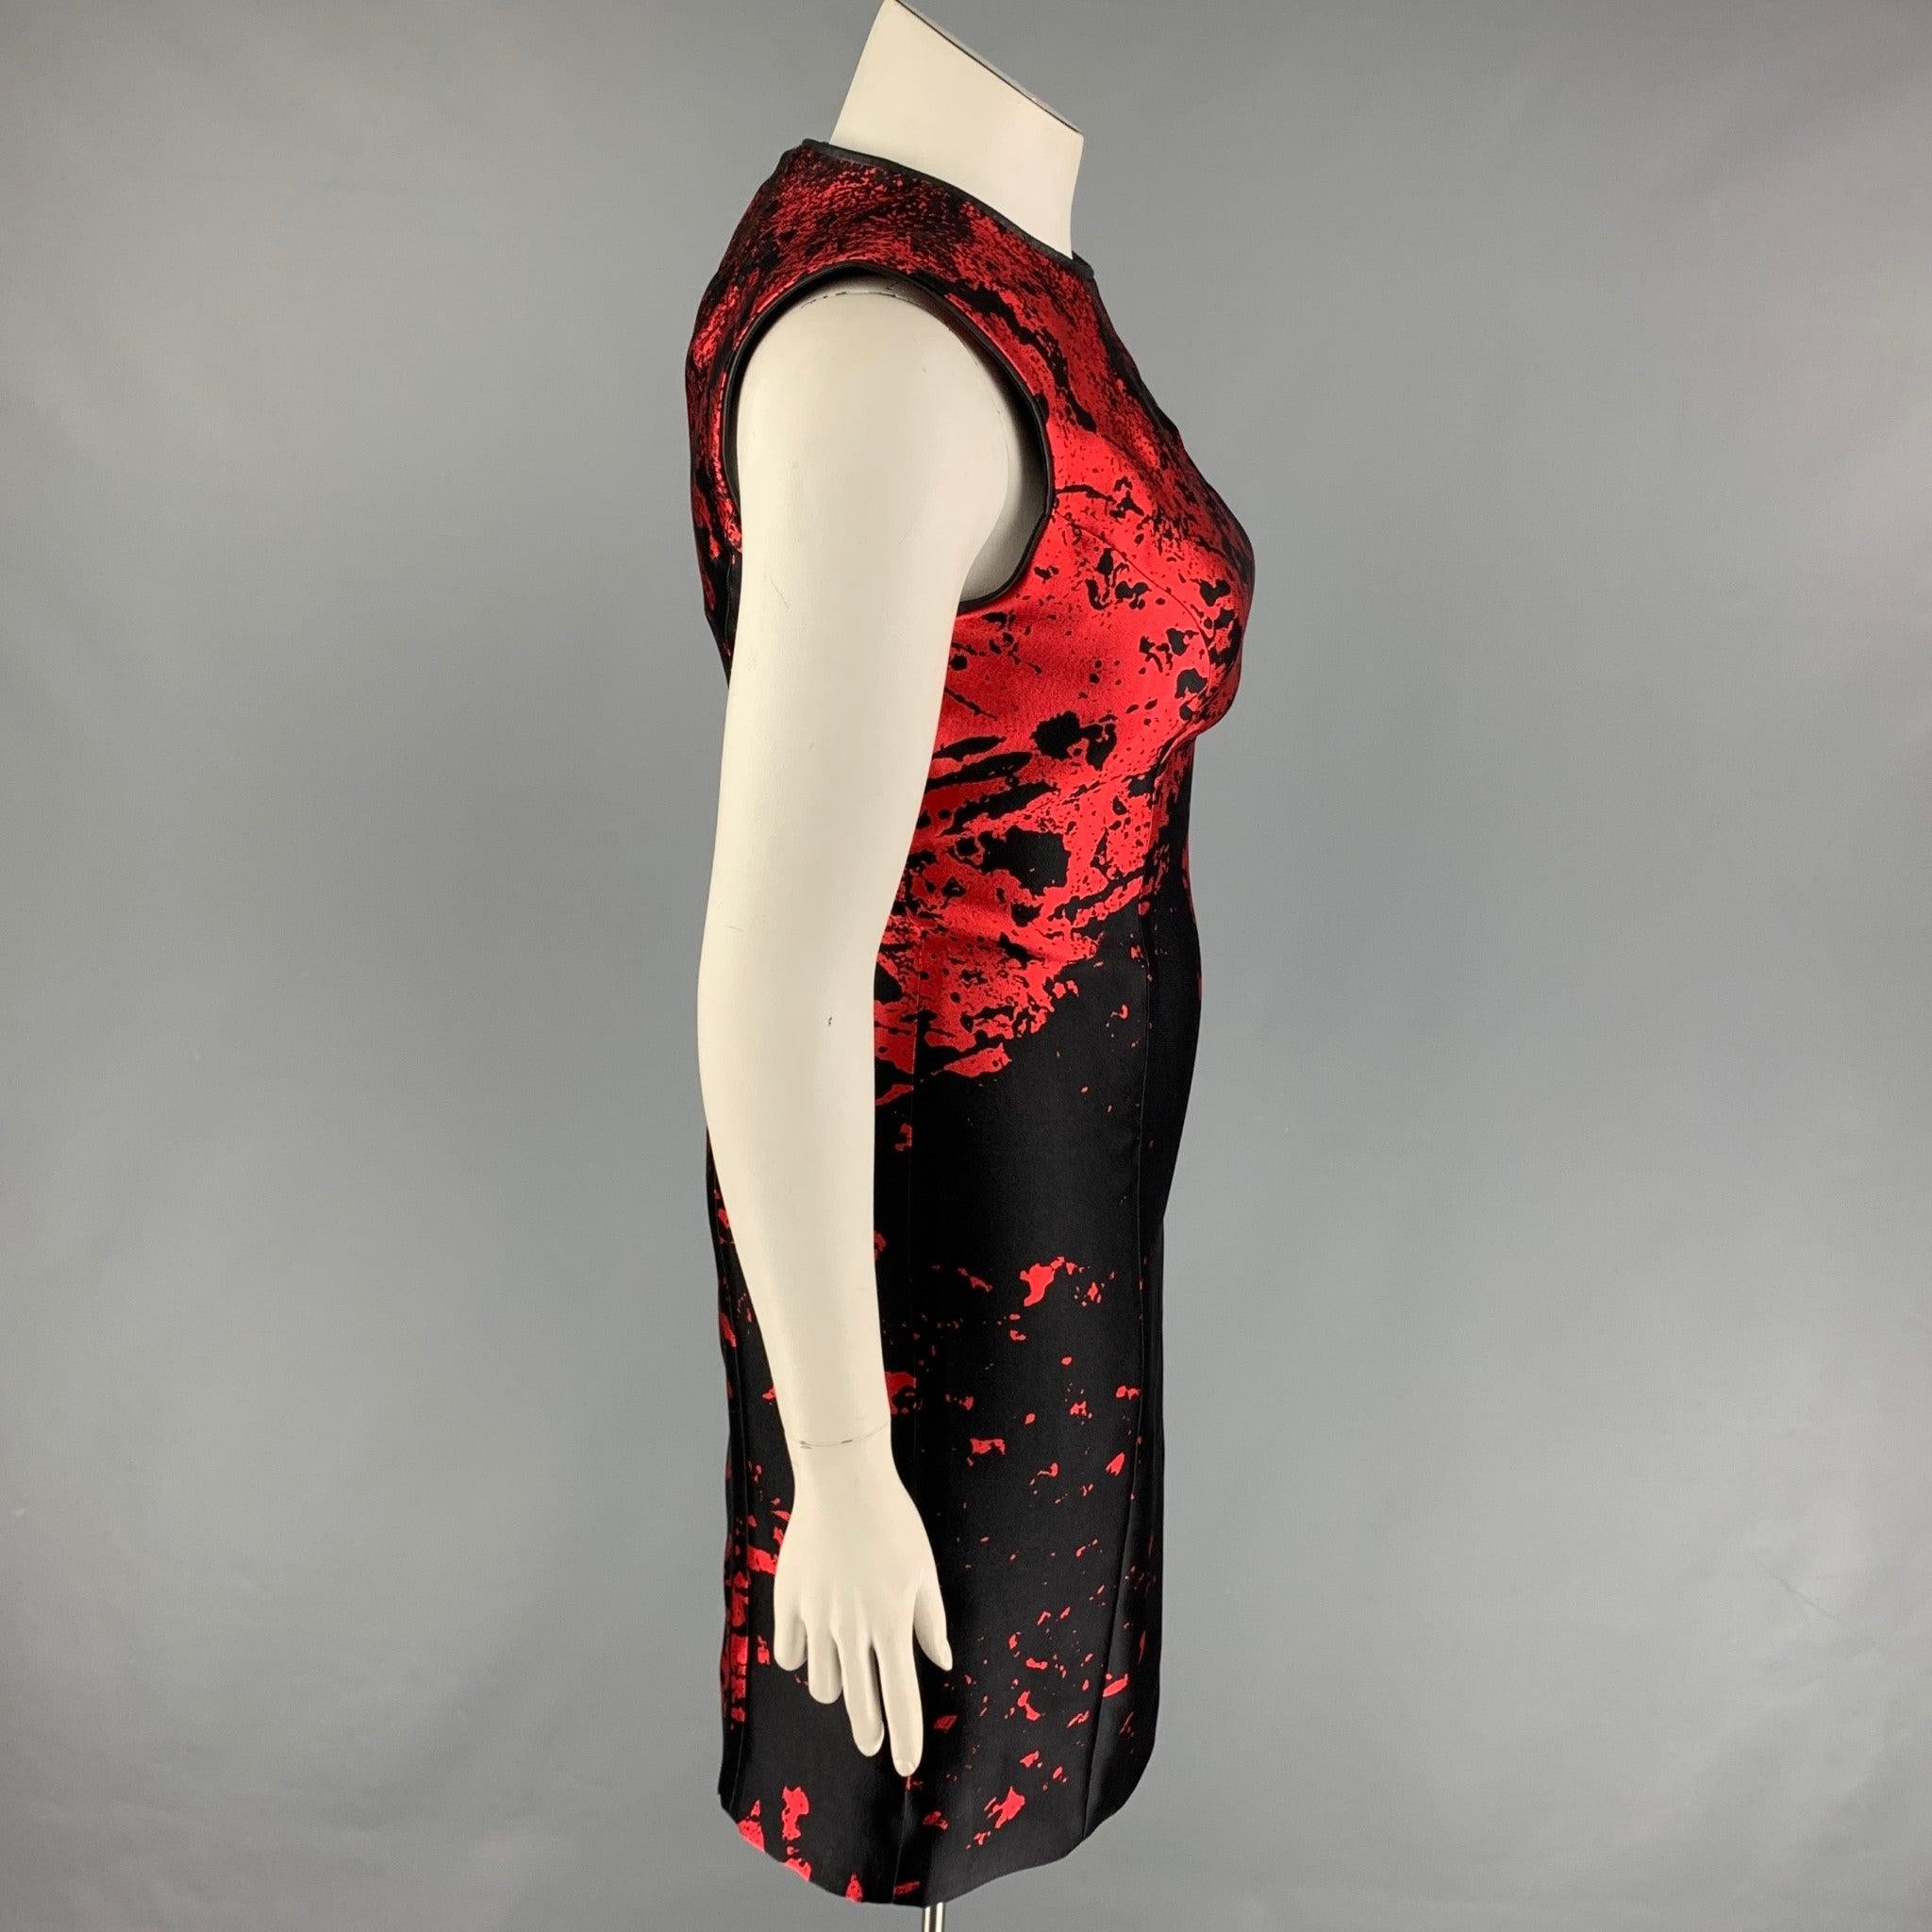 MONIQUE LHUILLIER dress comes in a black & red abstract print wool / lycra featuring a sheath style, leather trim, sleeveless, and a back zip up closure. Made in USA.
New With Tags.
 

Marked:   10 

Measurements: 
 
Shoulder: 14.5 inches  Bust: 35